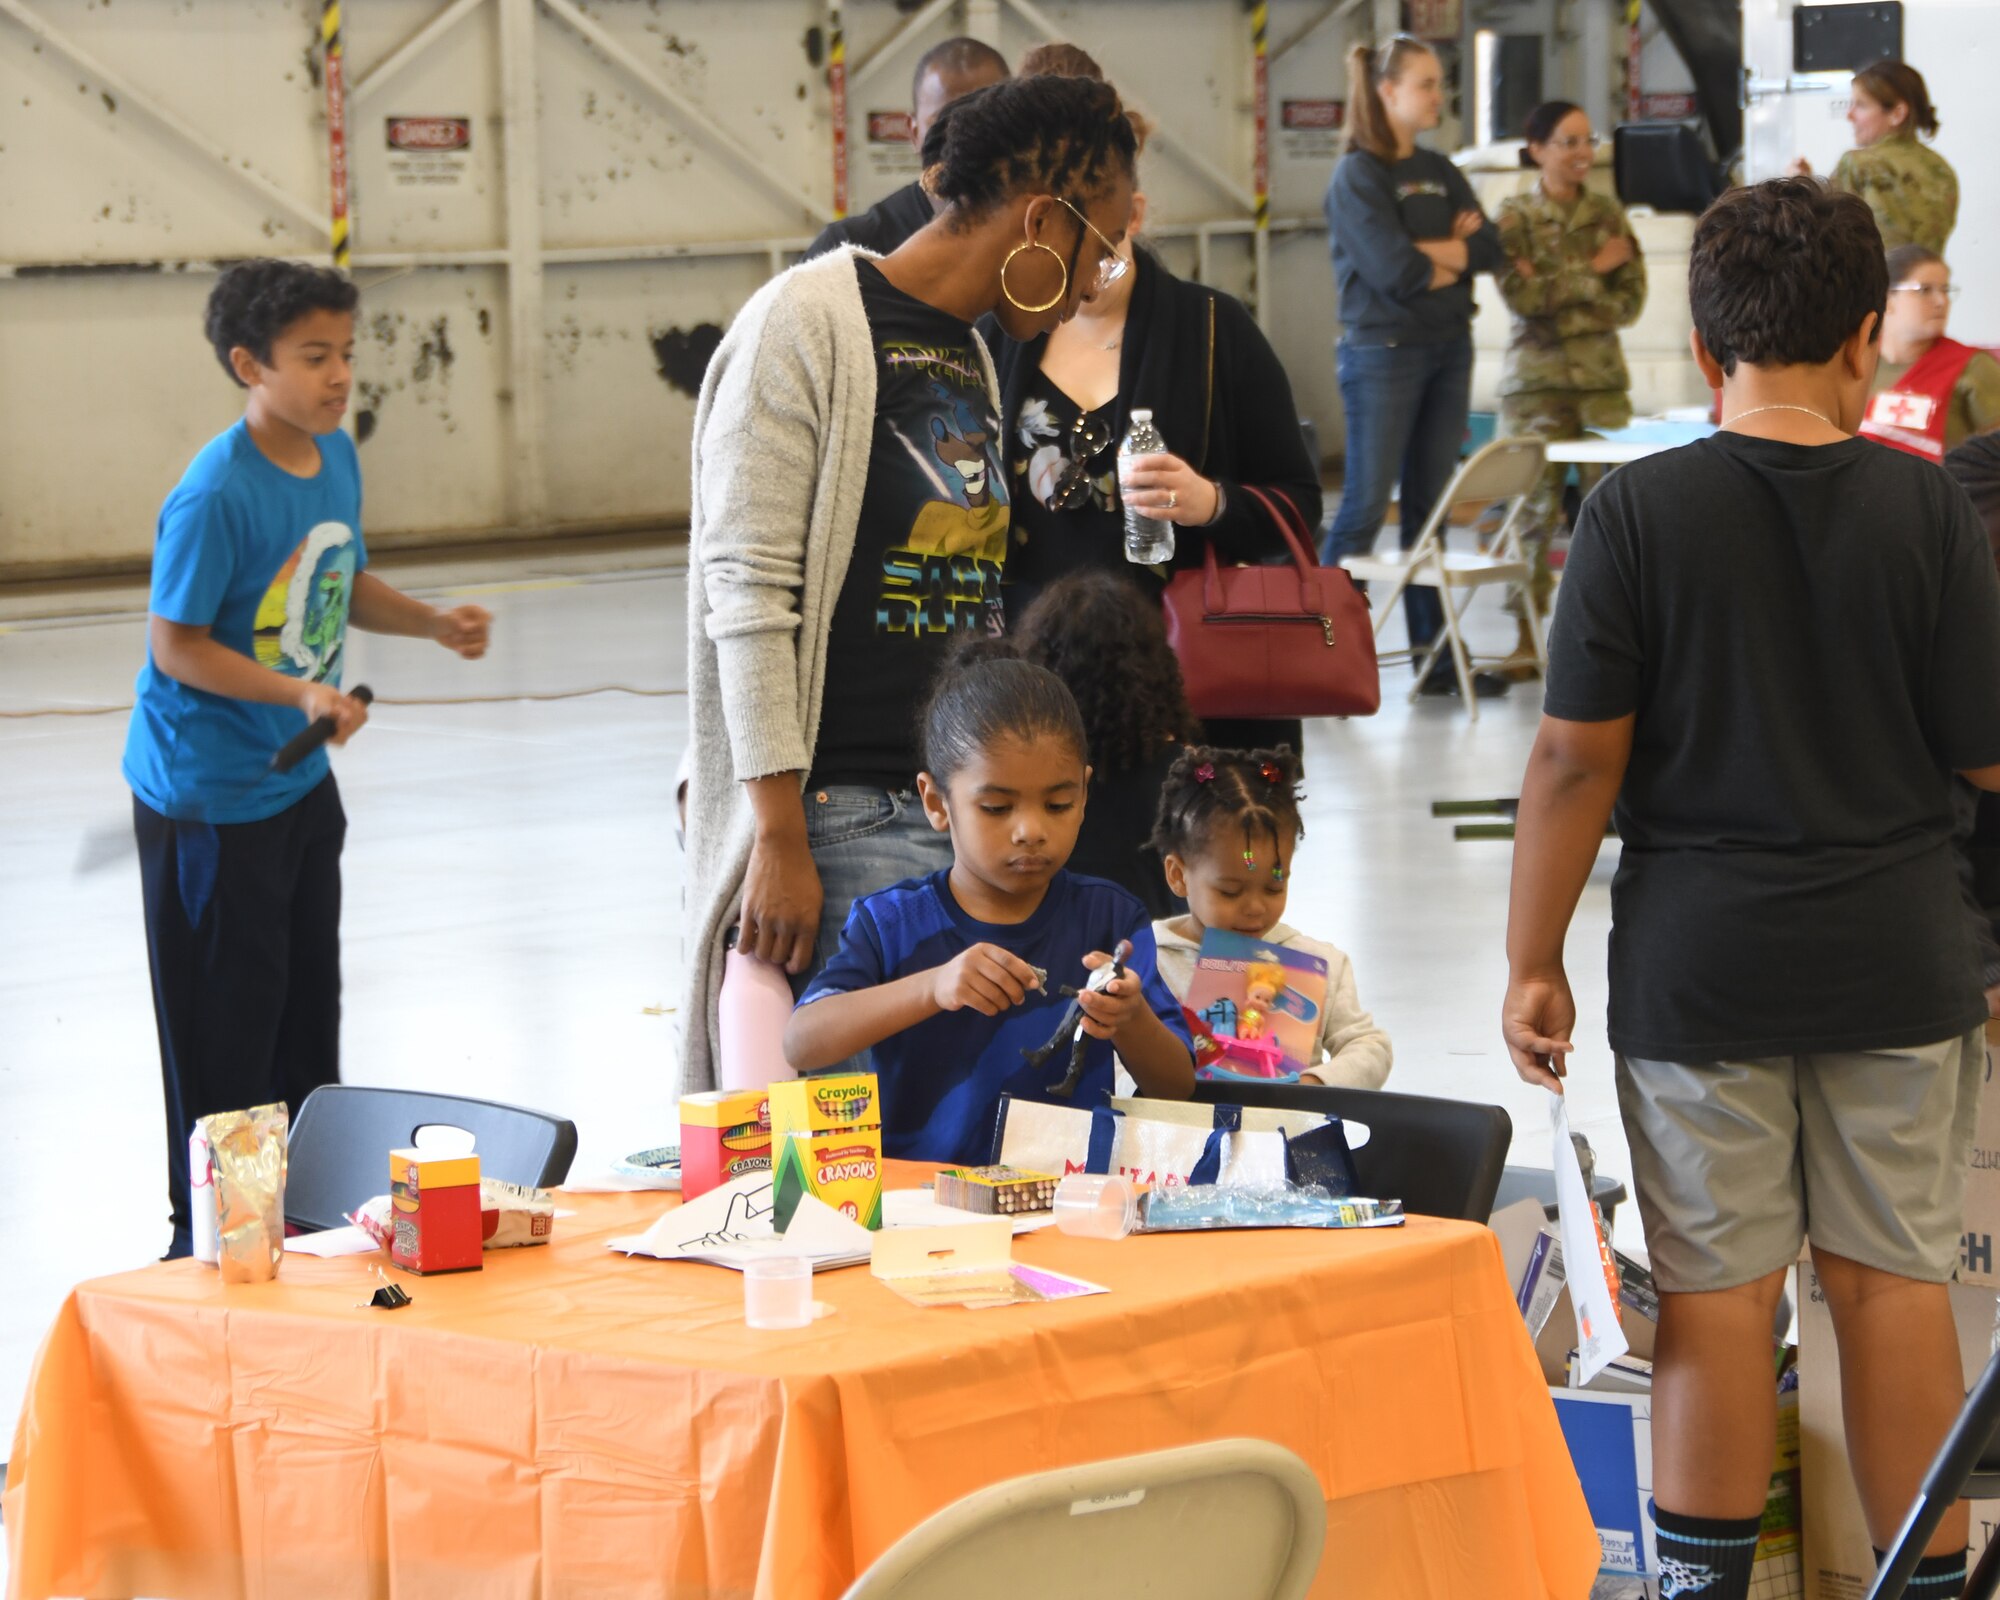 The 459th Air Refueling held its annual family day during the October 2022 UTA. The entire wing and the members families were permitted to participate in the morale event and were provided the rare opportunity to relax a bit and enjoy the various family-oriented activities and displays available. Numerous sponsors, participants, planners, and supporters made this event a success.